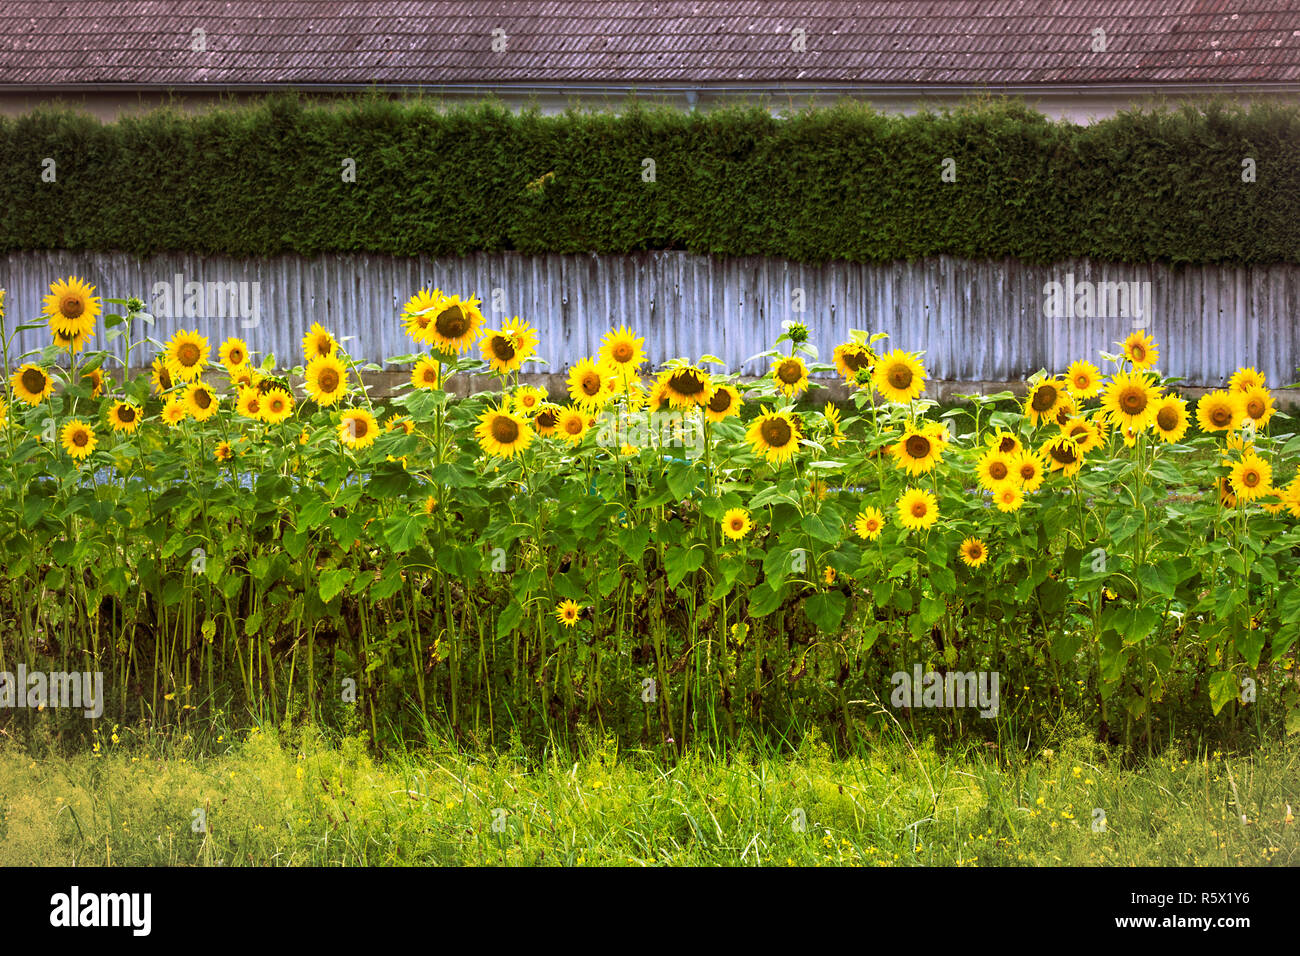 Raw of blooming garden sunflowers against the background of the wooden fence and hedge. Blossom rural garden Austria. Countryside. Stock Photo